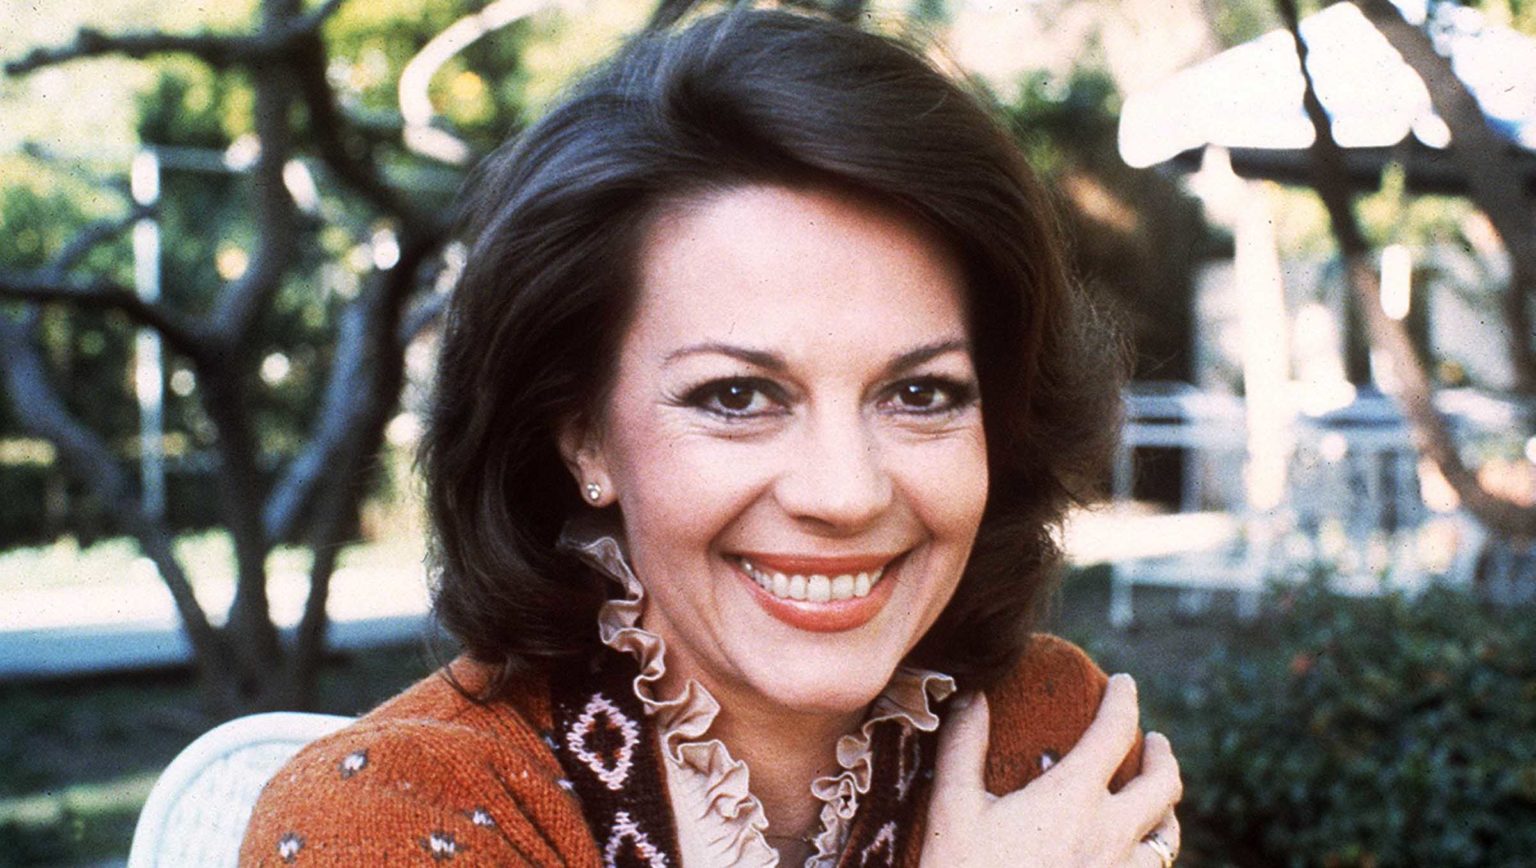 Natalie Wood’s death is one of those understood secrets of Hollywood. Here's everything we know about the tragedy and some interesting evidence.